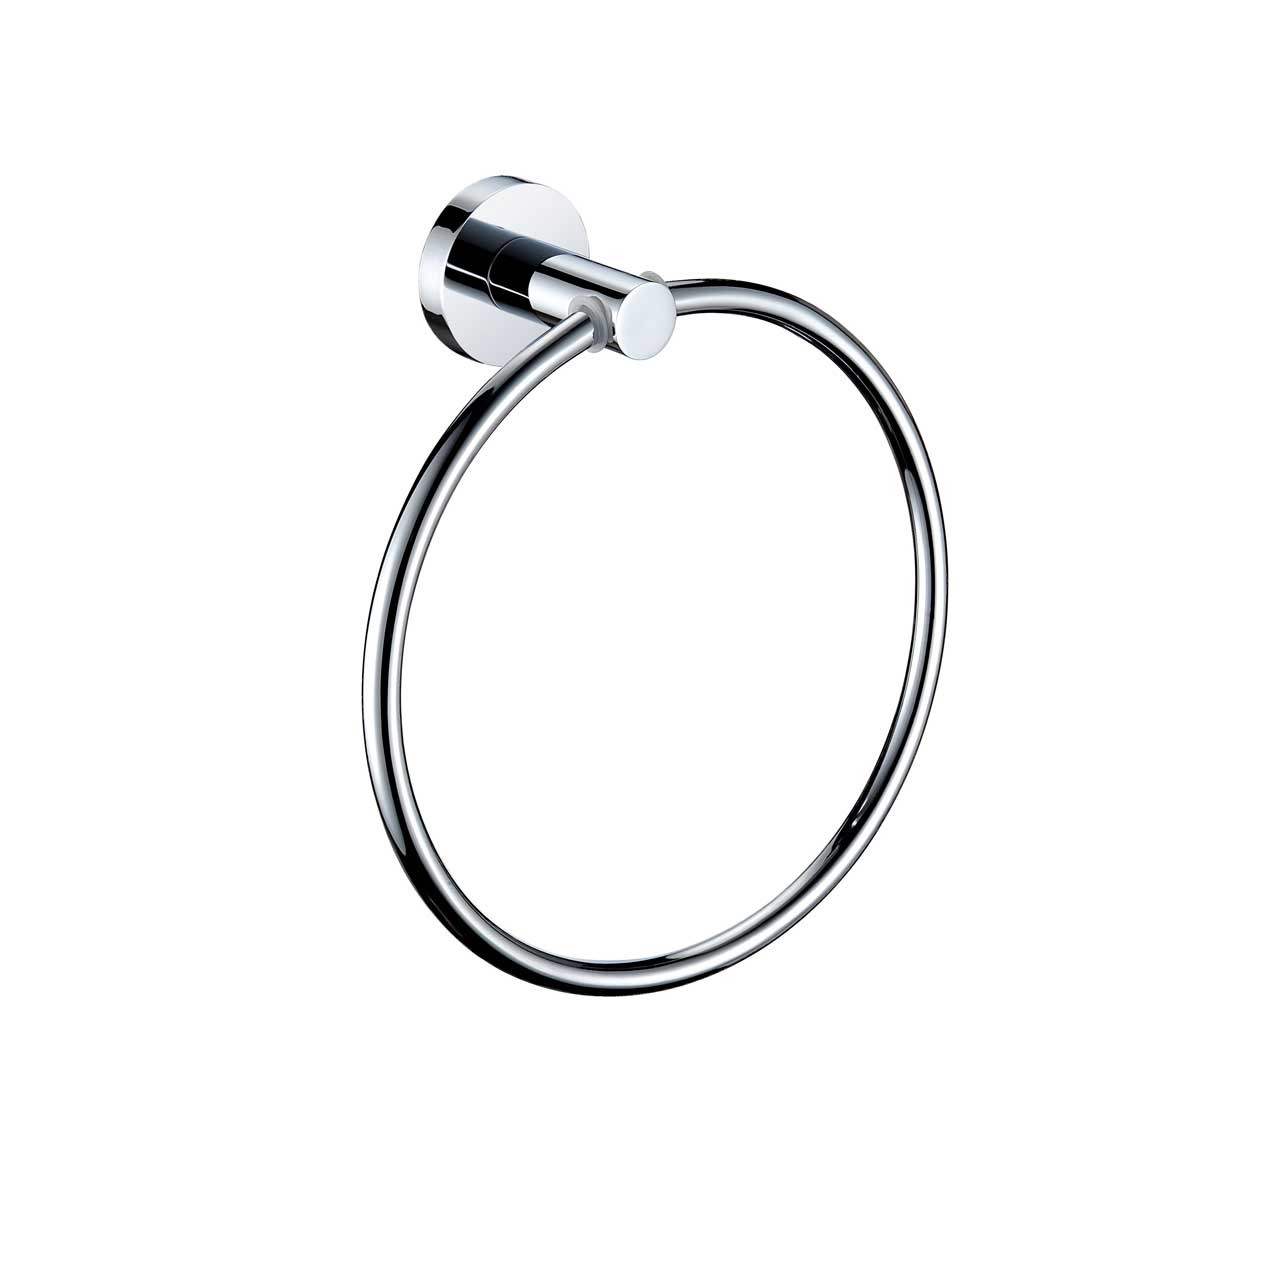 Photograph of Bristan Round Towel Ring Brass Chrome Plated